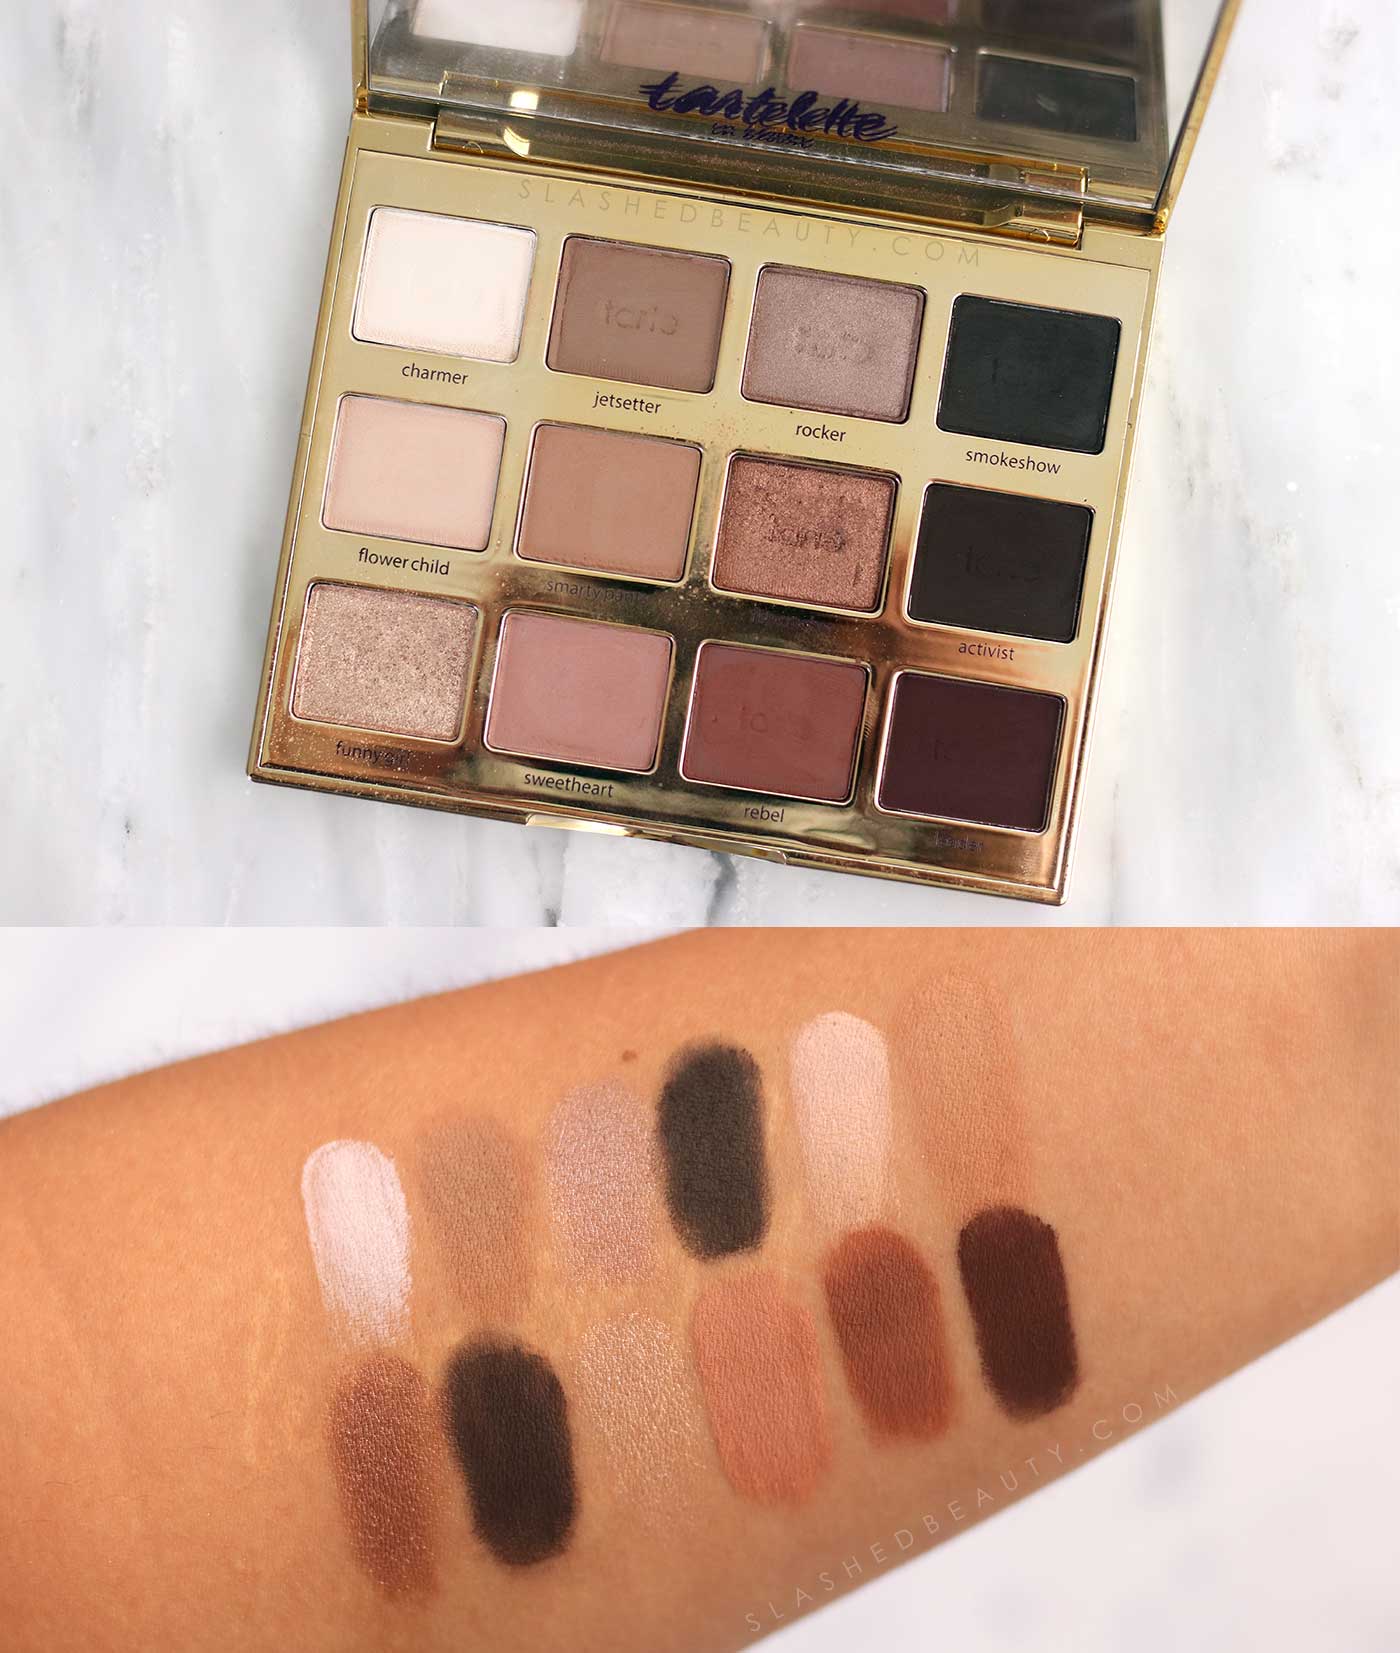 Tarte Tartelette In Bloom Palette Swatches | 5 Neutral Eyeshadow Palettes for Every Budget | Slashed Beauty